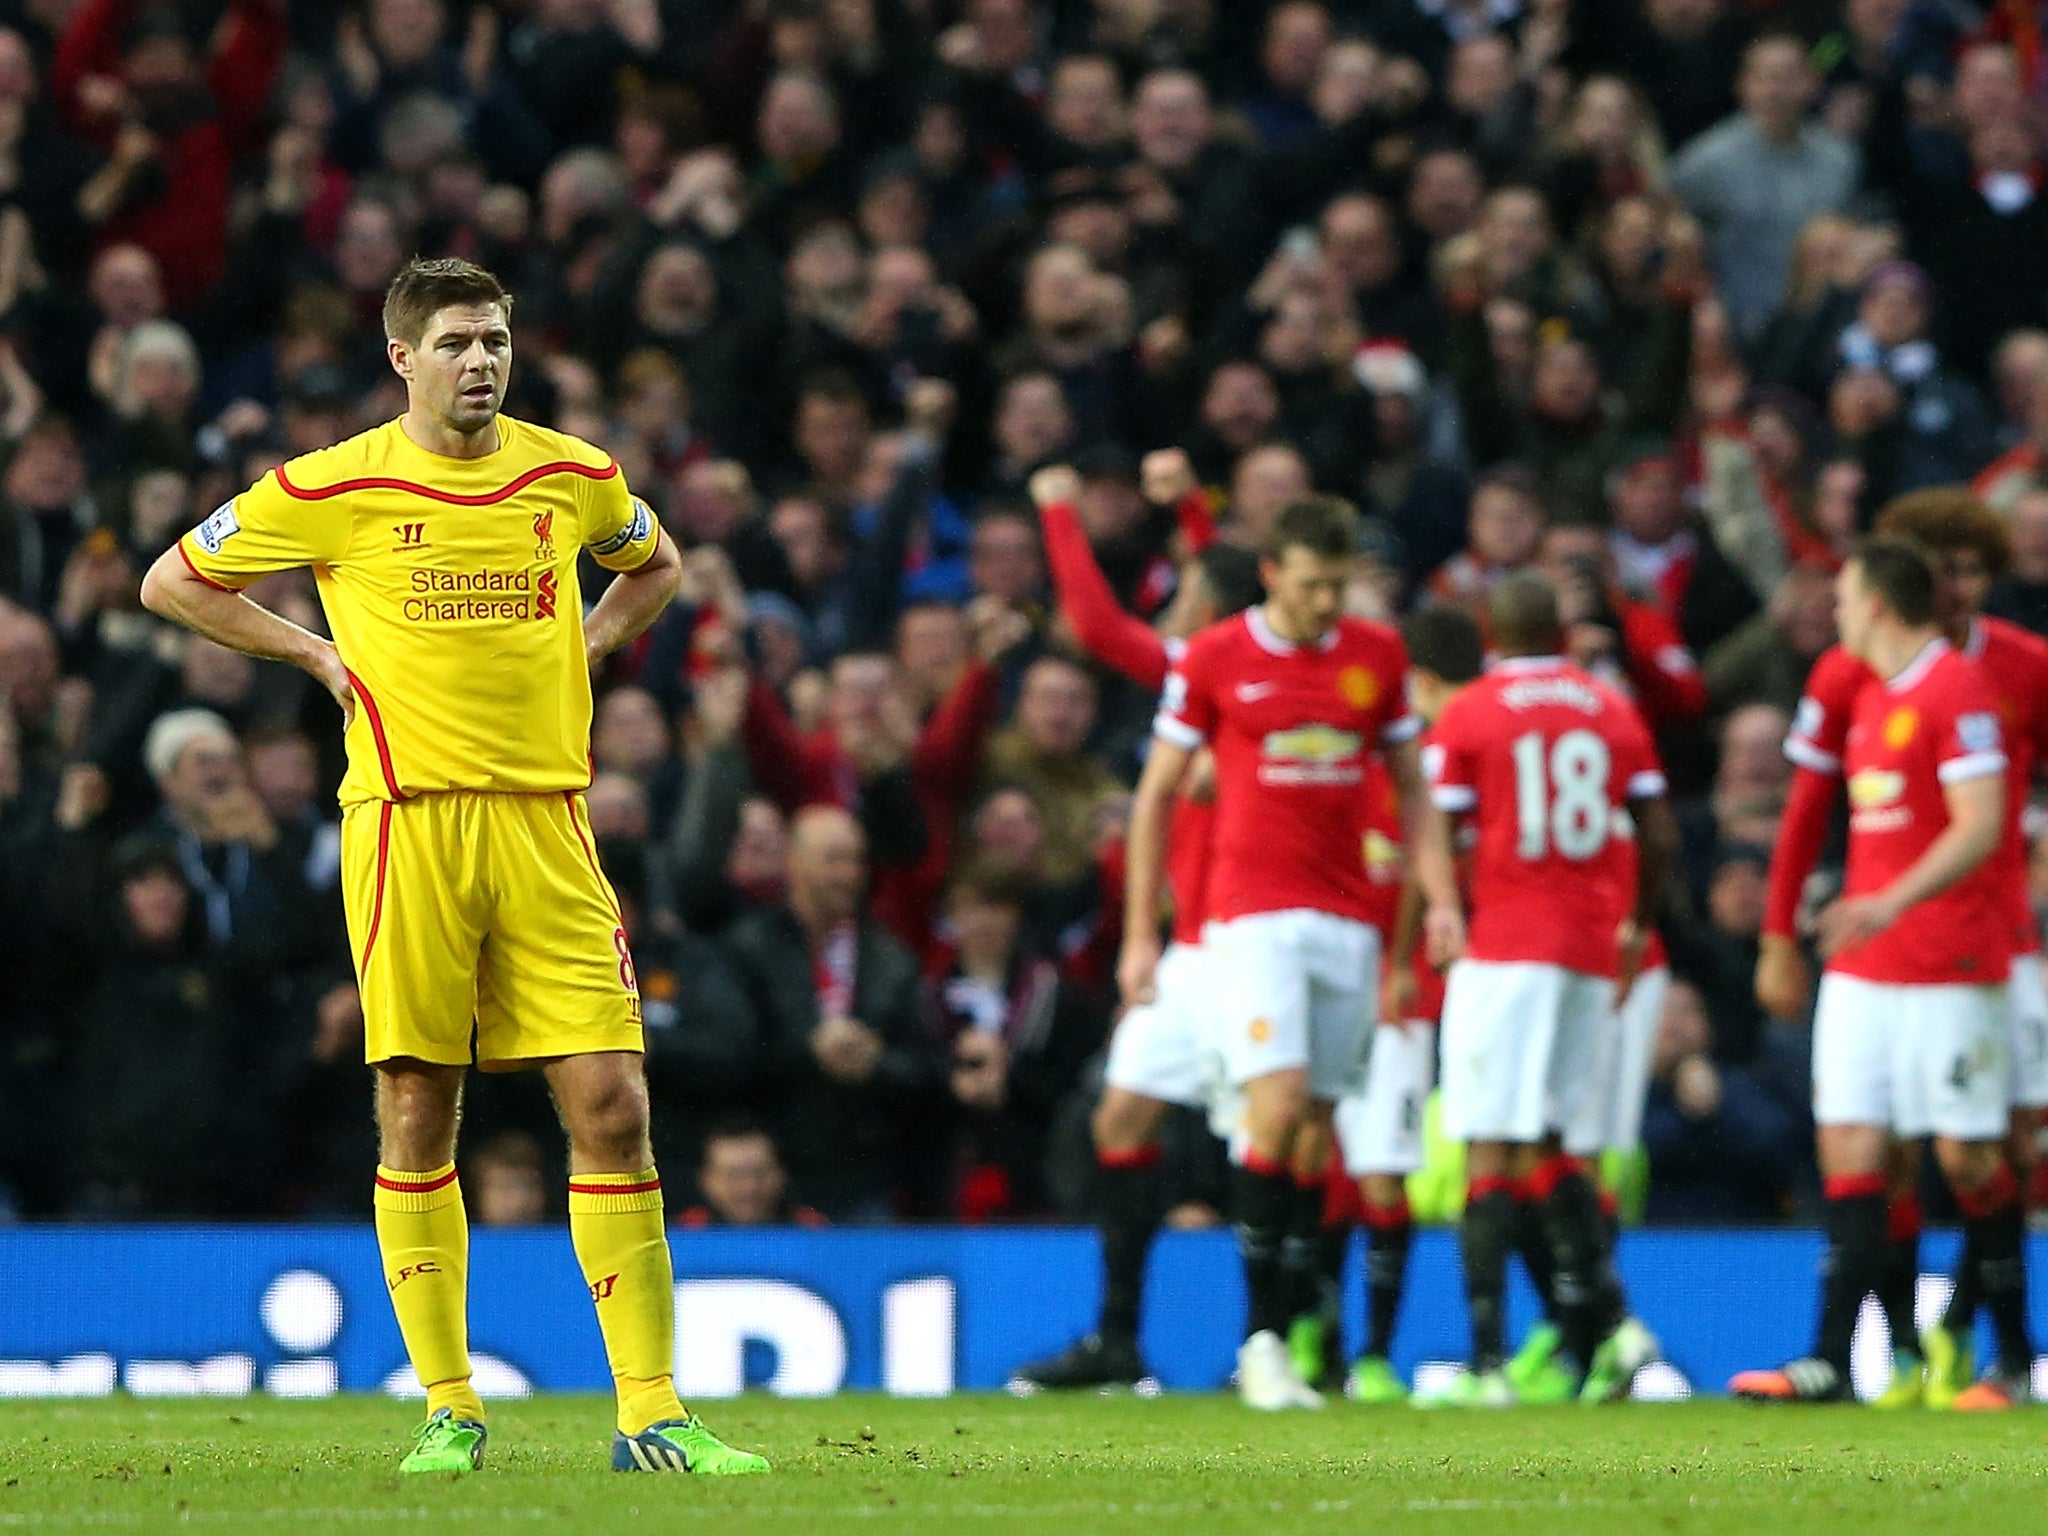 Steven Gerrard pictured during Liverpool's 3-0 defeat to Manchester United at Old Trafford